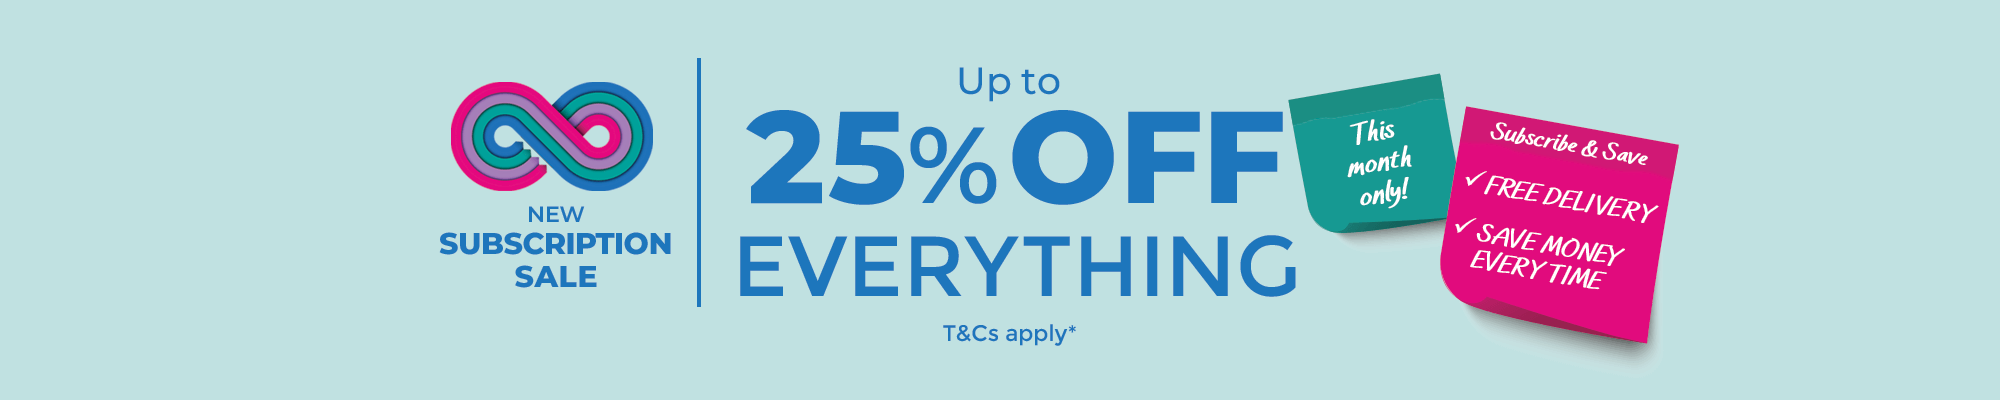 New Subscription Sale - Up to 25% off everything. This month only!